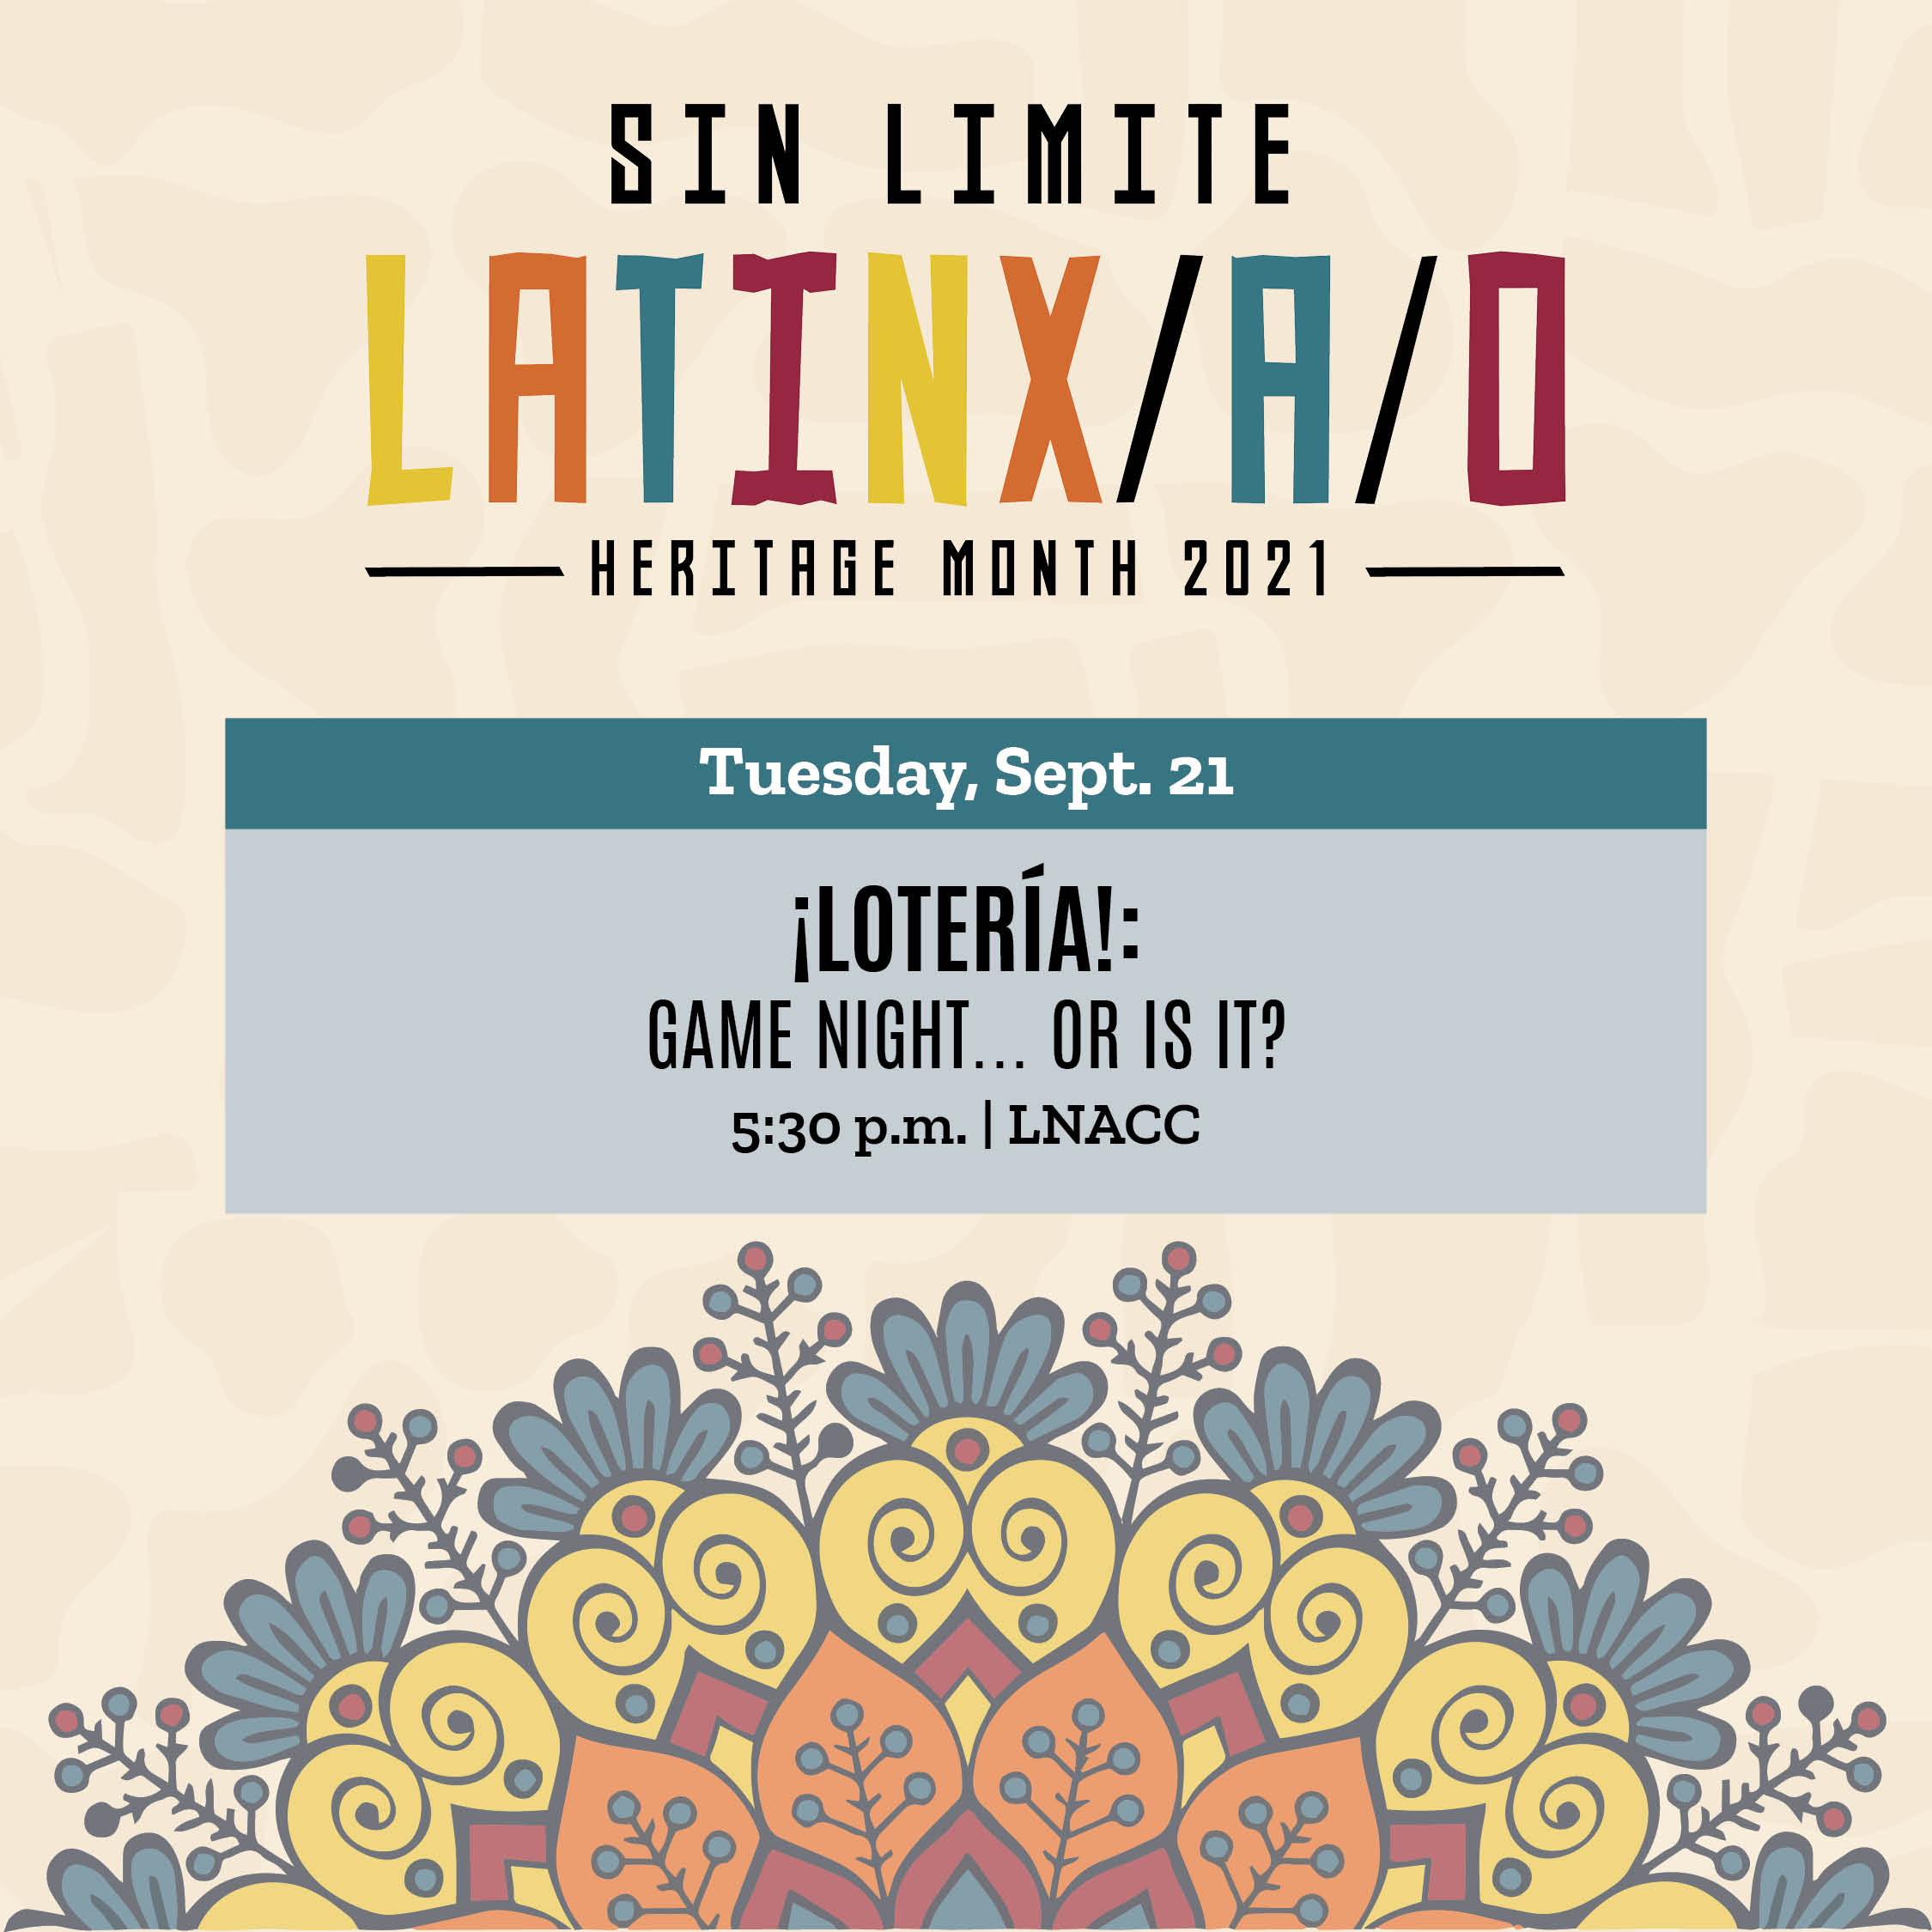 Latinx/a/o Heritage Month, 2021 - Loteria: Game Night... or is it? Time: 5:30 p.m. - 7 p.m. at the LNACC - flower design in back